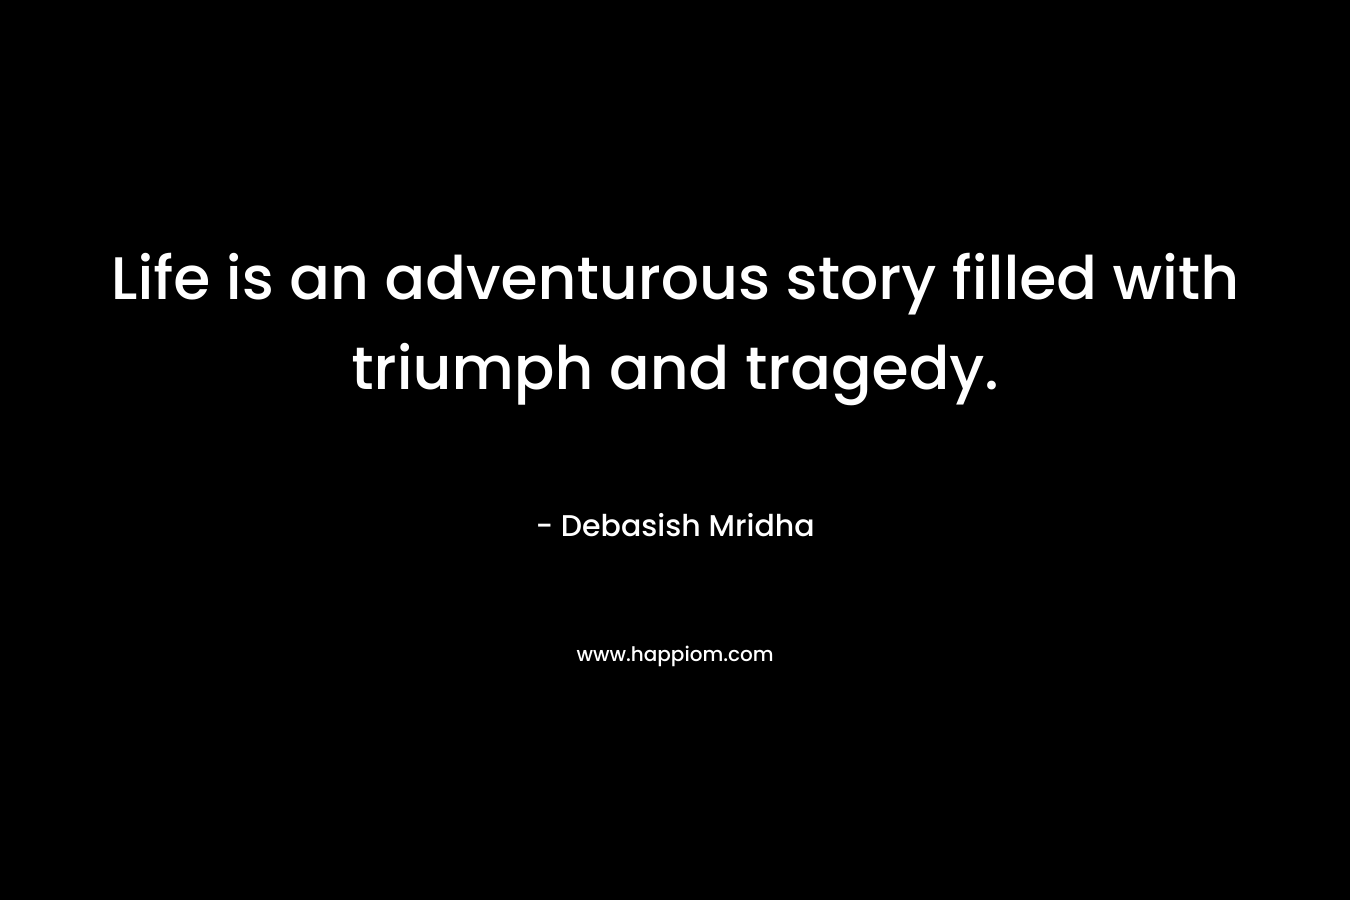 Life is an adventurous story filled with triumph and tragedy. – Debasish Mridha